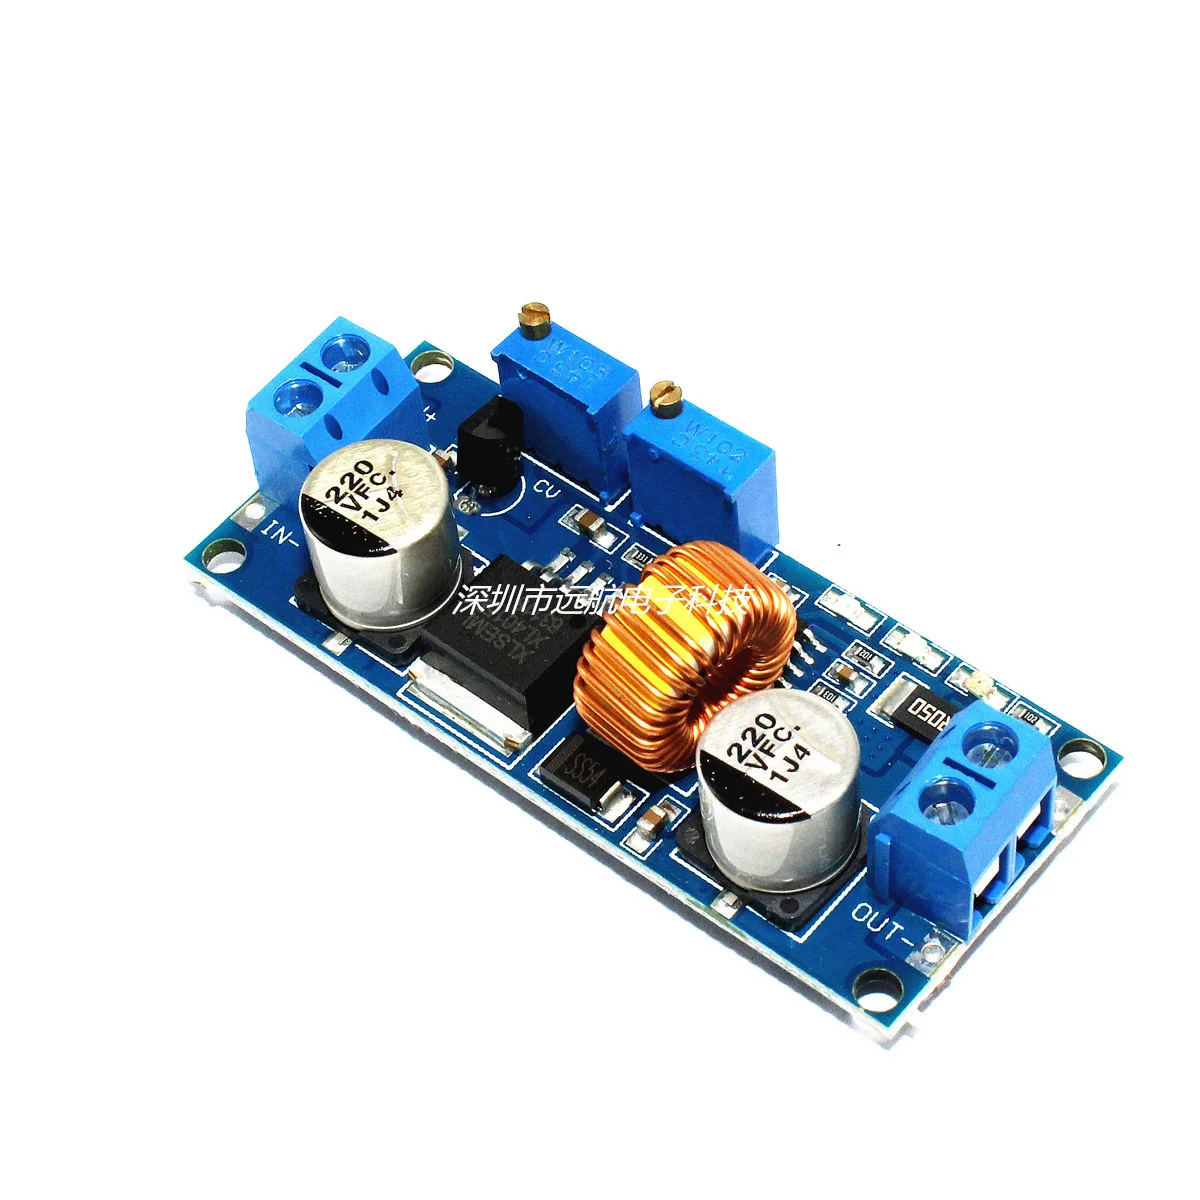 

K21 High Current 5a Constant Voltage Constant Current Step-down Power Module Led Driven Lithium Battery Charging Brand New